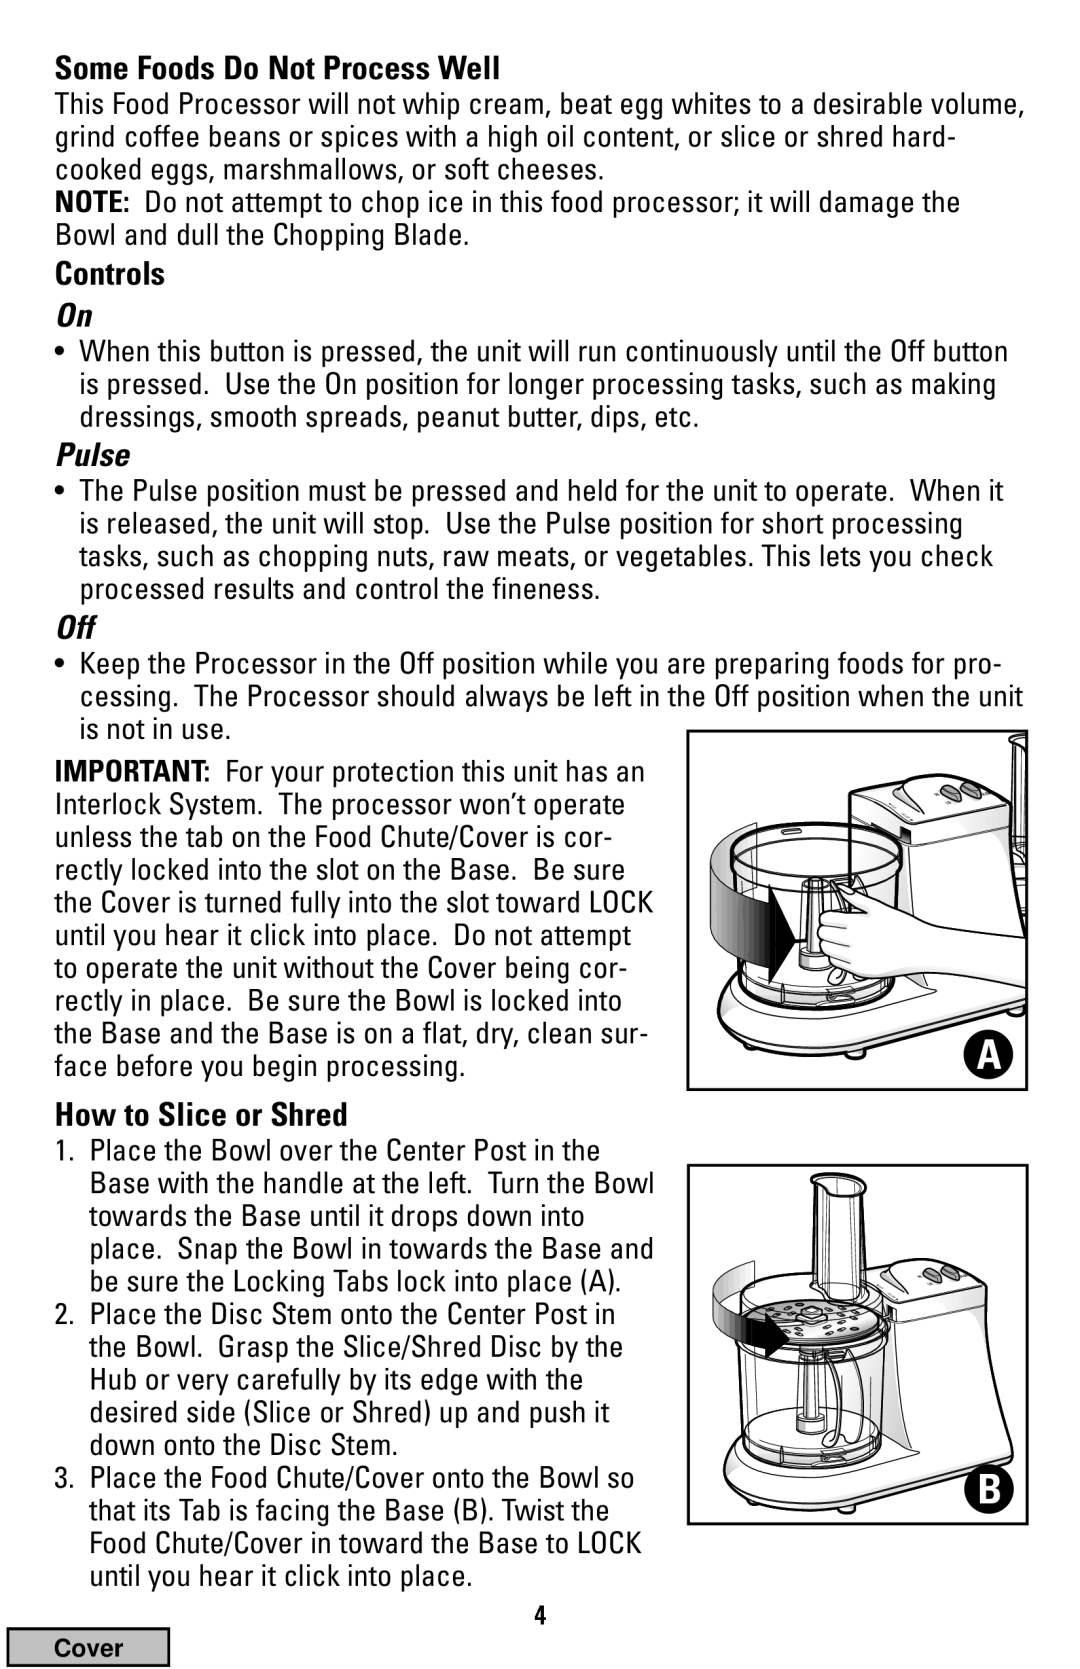 Black & Decker FP1200 manual Some Foods Do Not Process Well, Controls, Pulse, How to Slice or Shred 